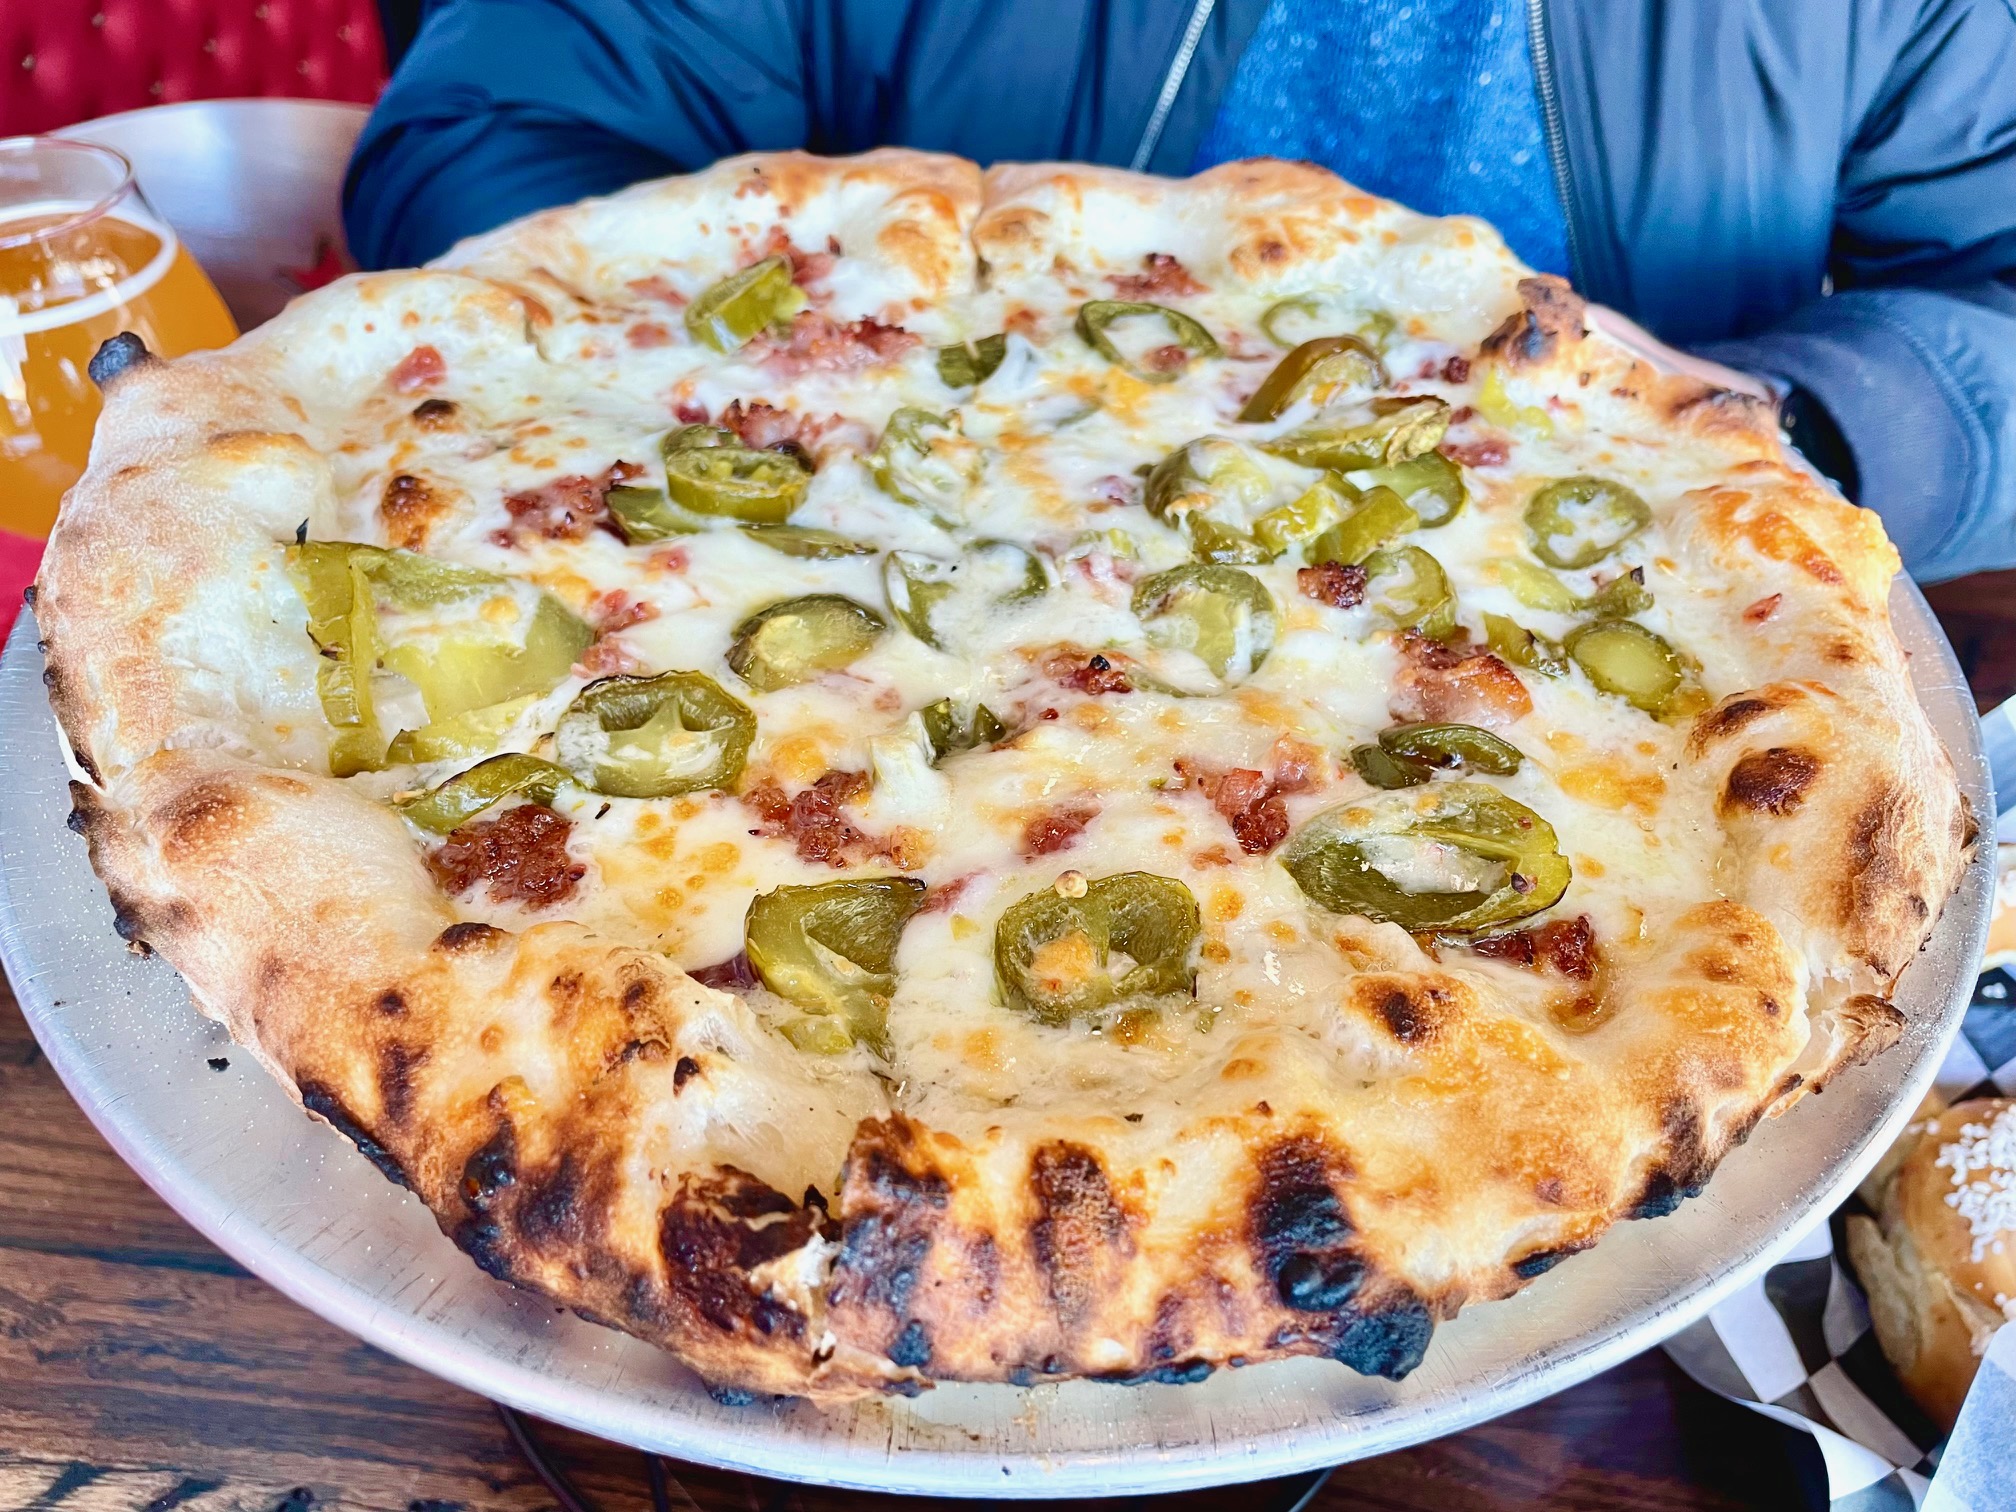 My Bacon & Jalapeno Pizza from South of Shaw Beer Co was delicious